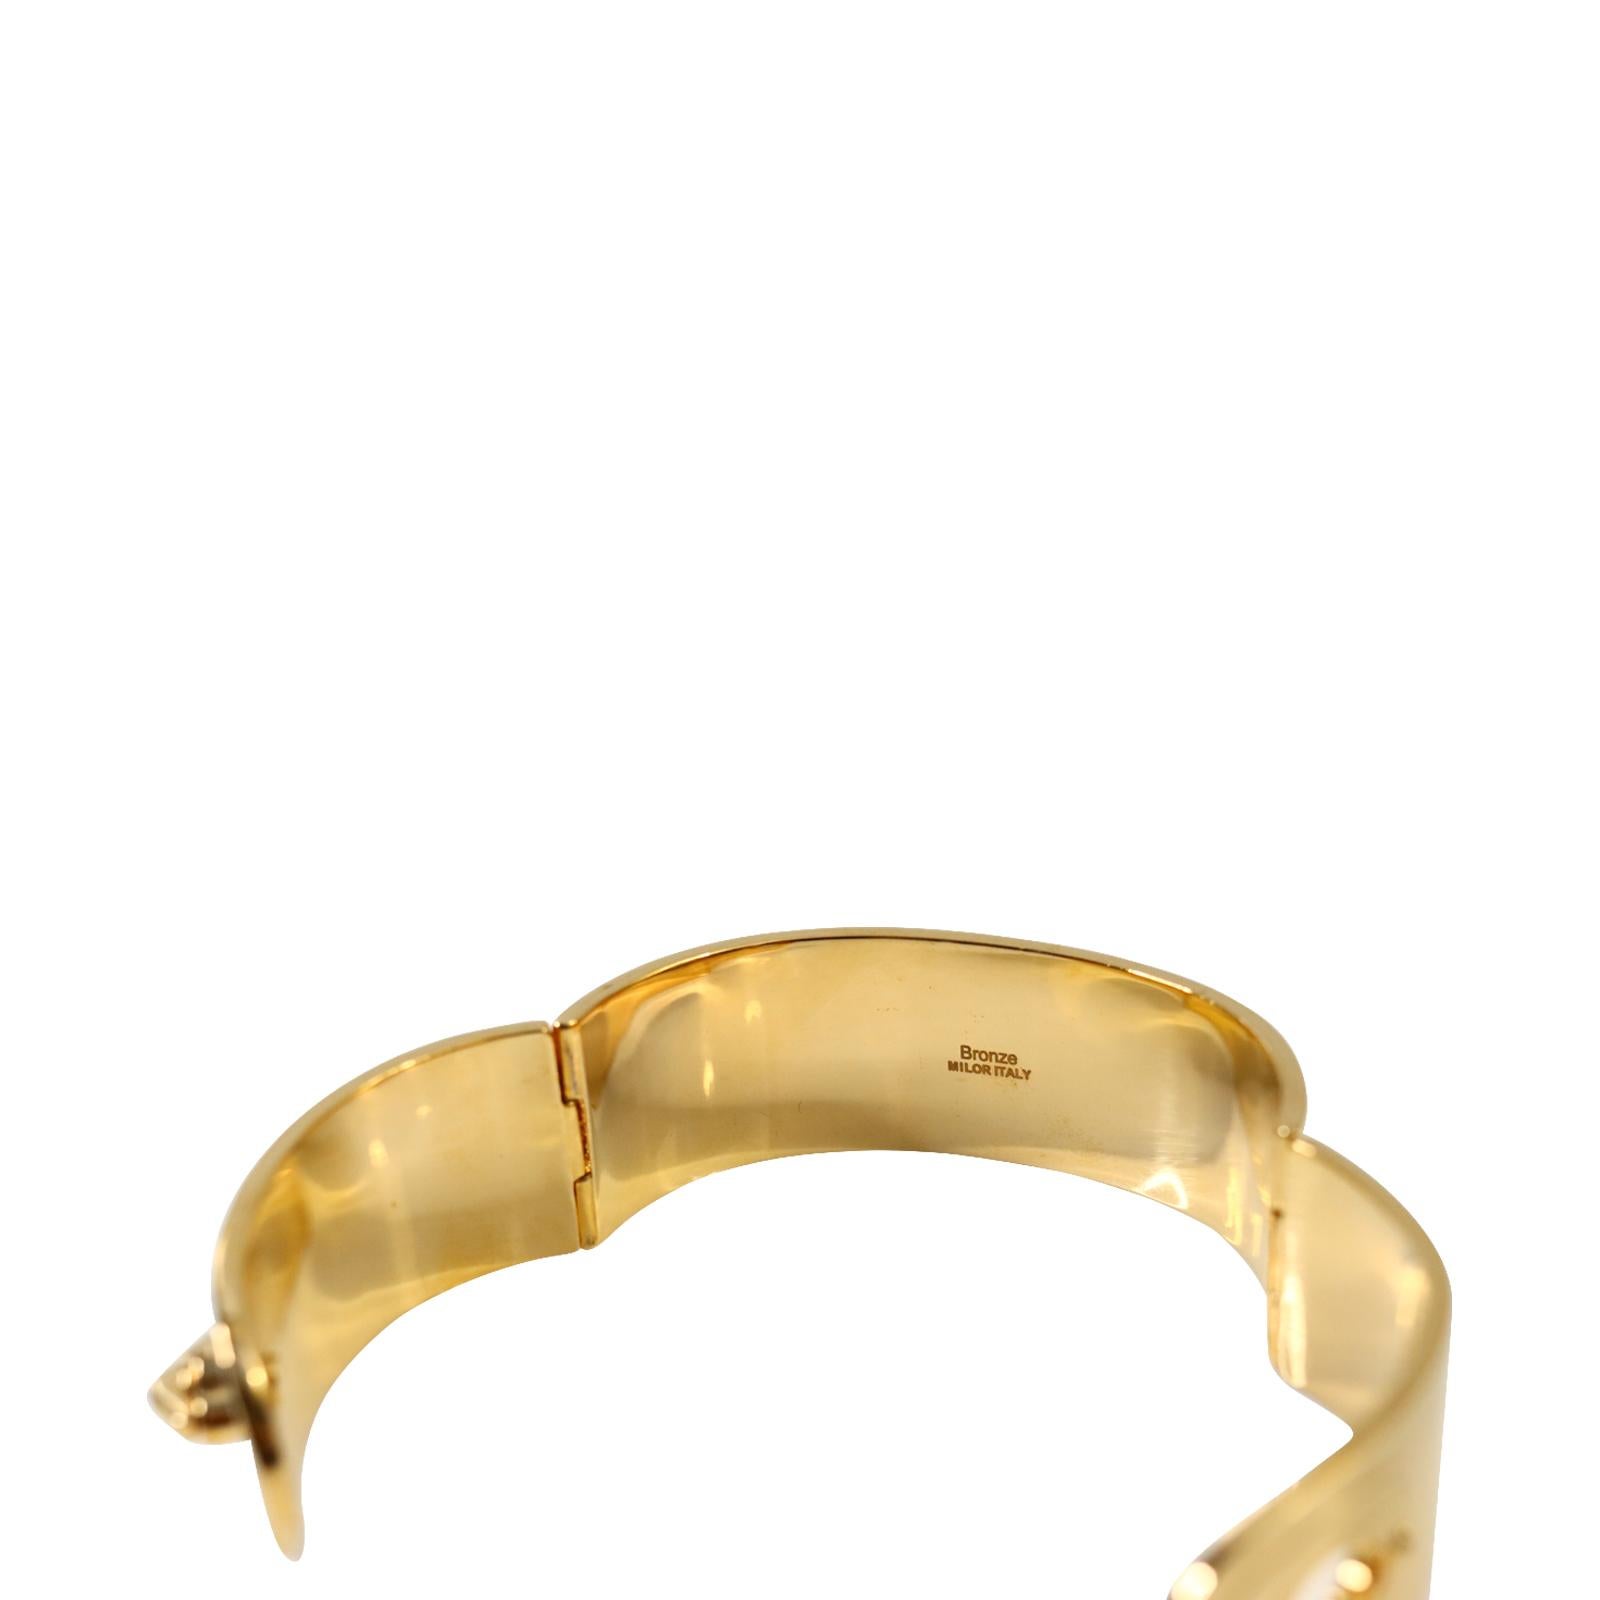 Vintage Rose Gold Tone Heavy Bracelet With Working Lock Circa 1990s In Good Condition For Sale In New York, NY